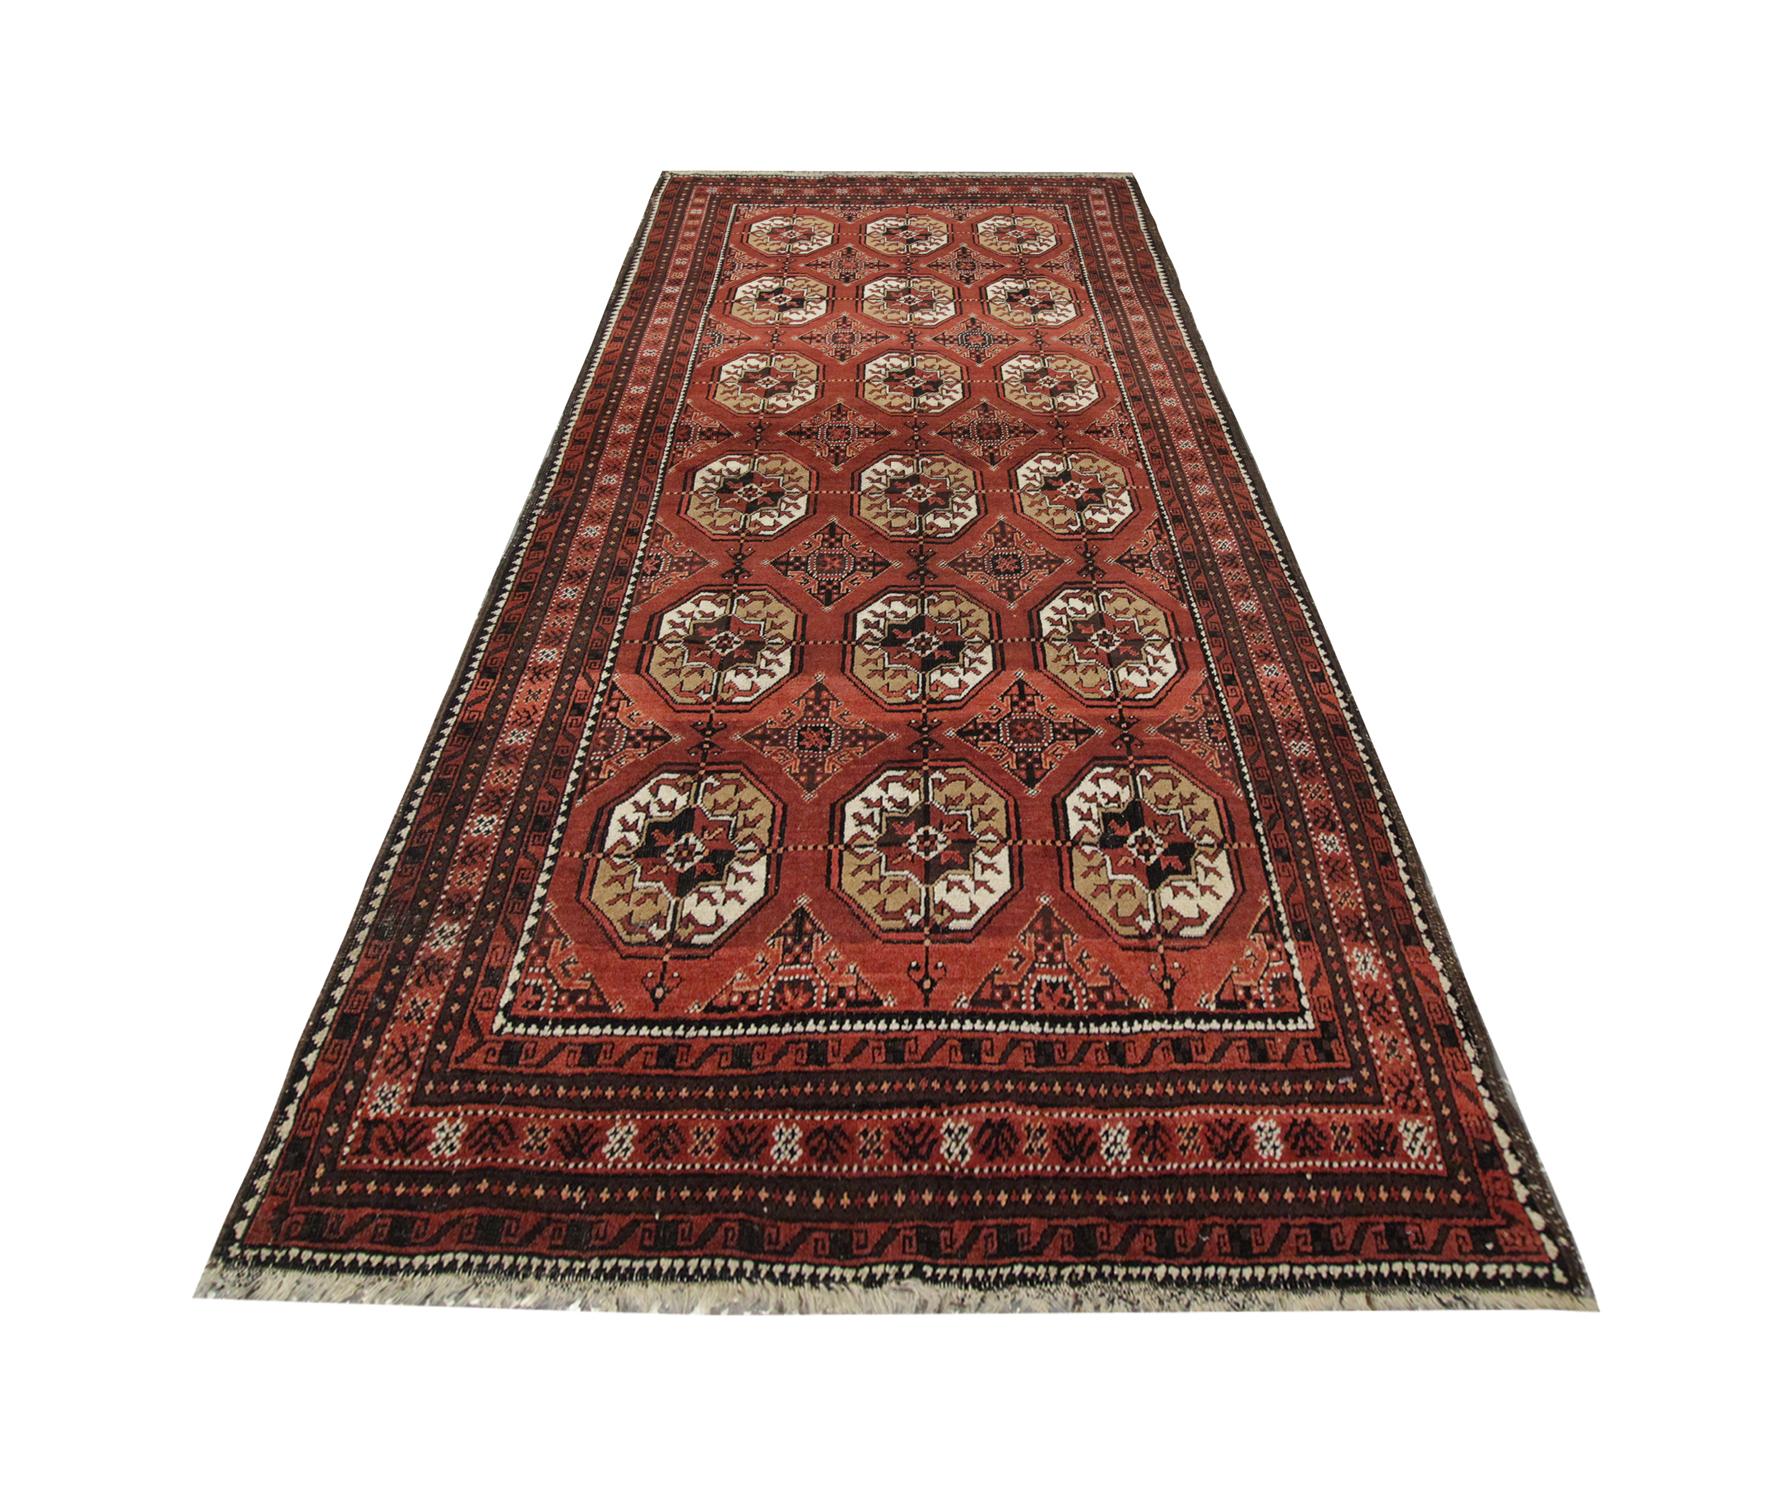 Light up your interior floors with this handmade carpet Oriental rug high-quality antique Turkmen rug, with a tribal repeat pattern, handwoven in 1940 with hand-spun, vegetable-dyed wool, and cotton, by some of the finest artisans. Perfect for both